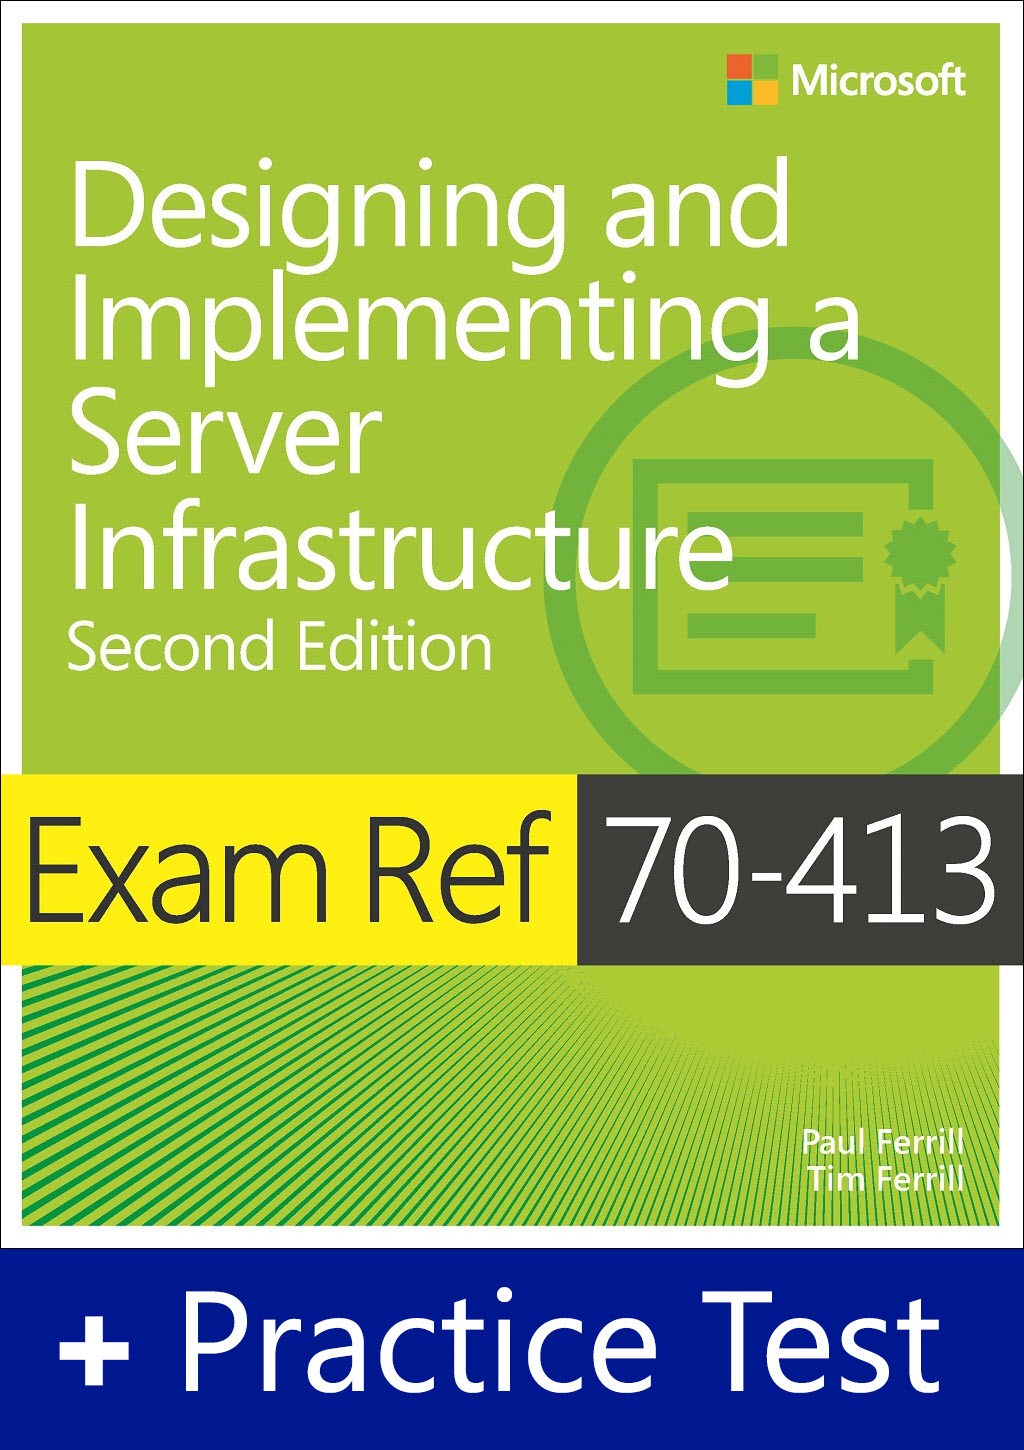 Exam Ref 70-413 Designing and Implementing a Server Infrastructure with Practice Test